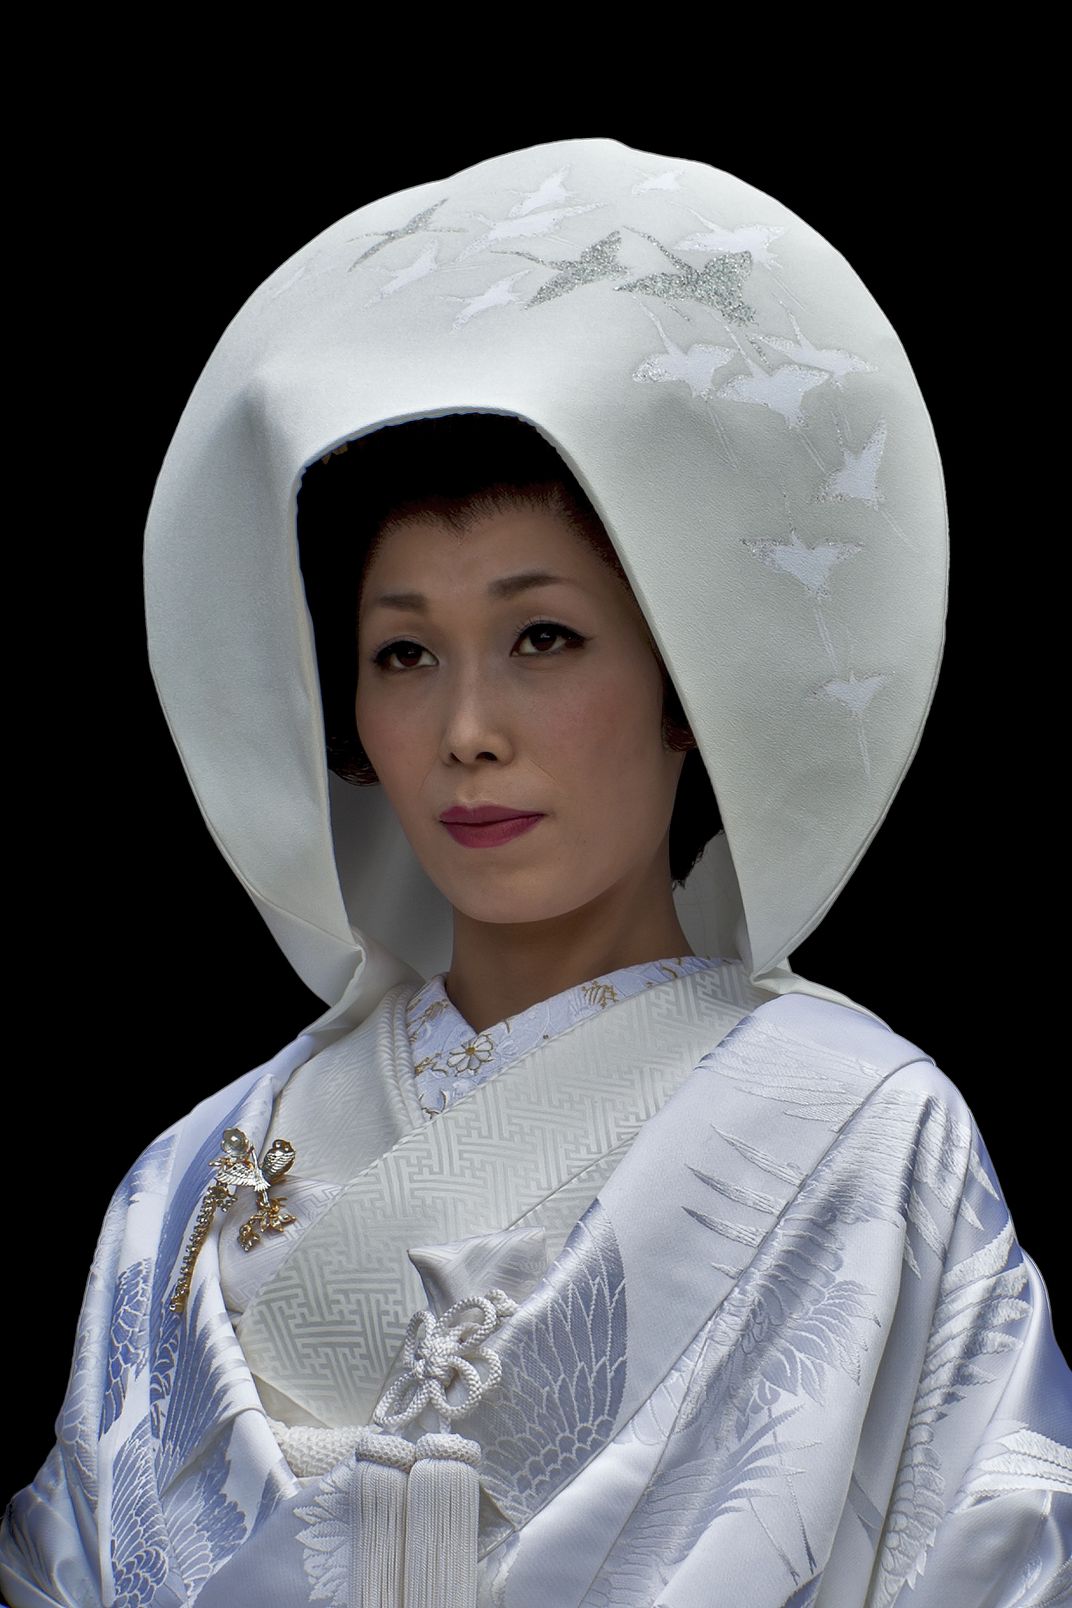 Brideshead Revisited A Japanese Bride in traditional wedding dress. At